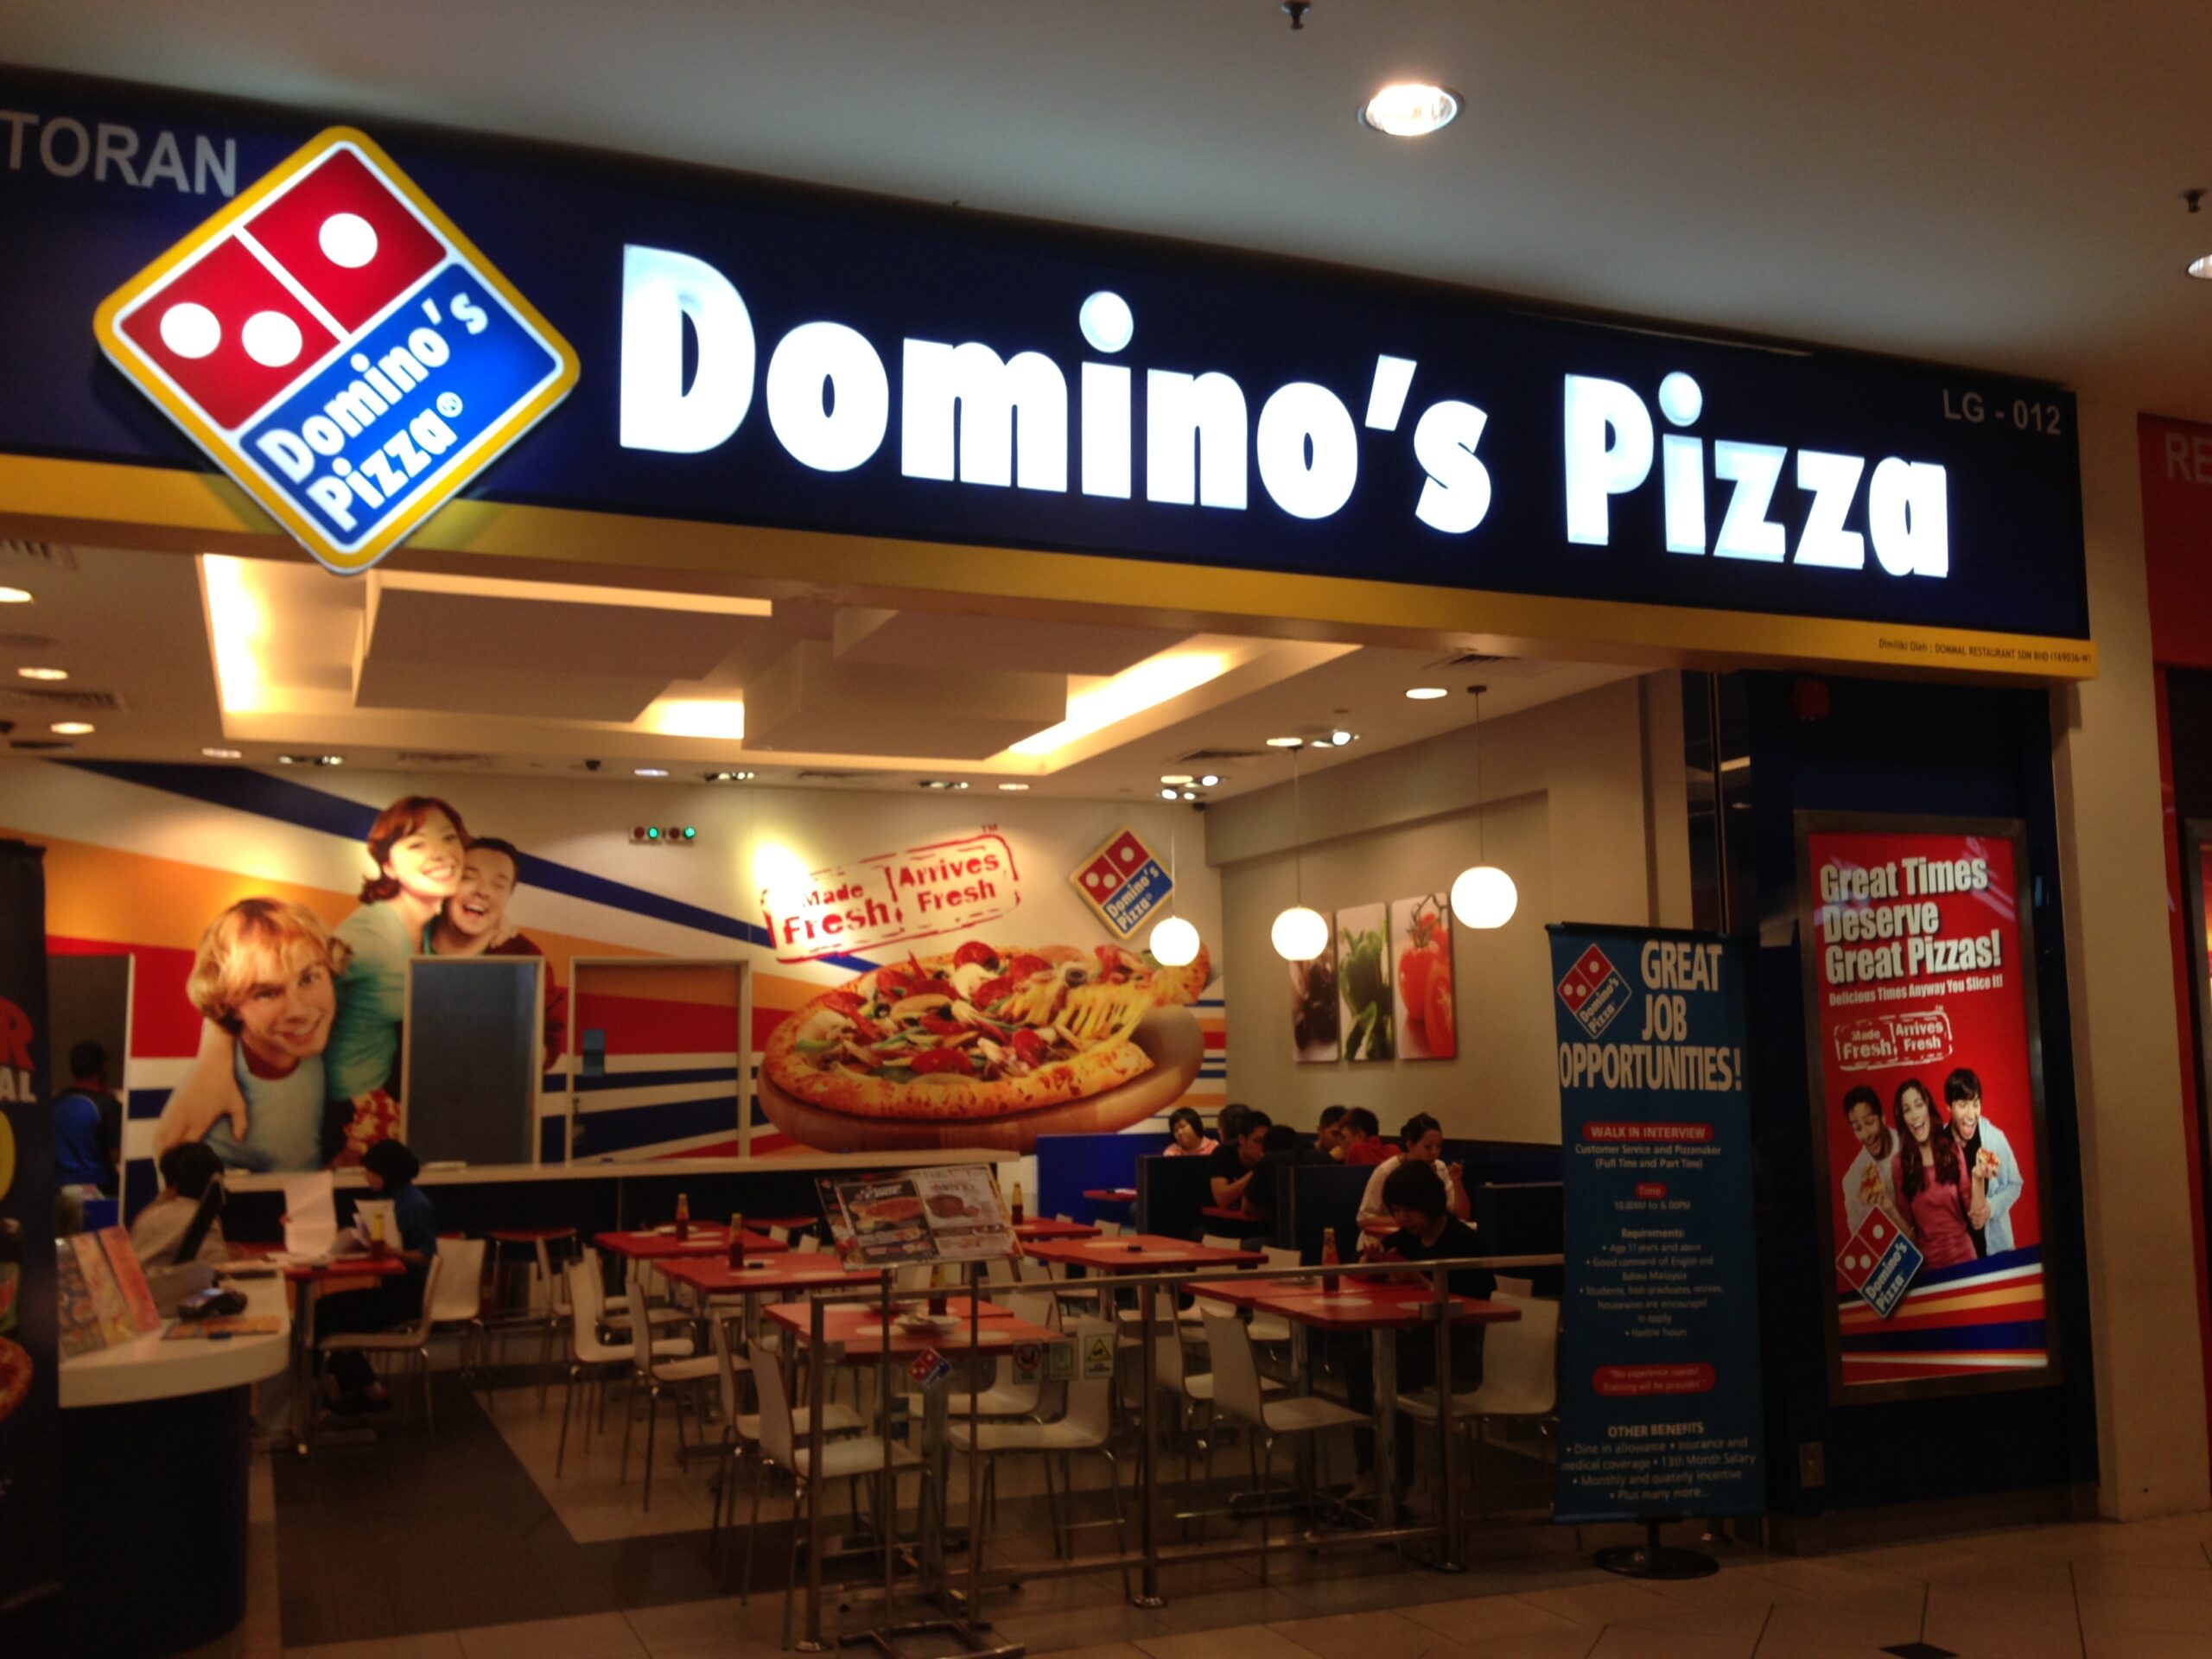 Image: Domino's Pizza logo featuring two blue domino tiles with the brand name in red font. Top pizza franchise in India - Domino's Pizza.